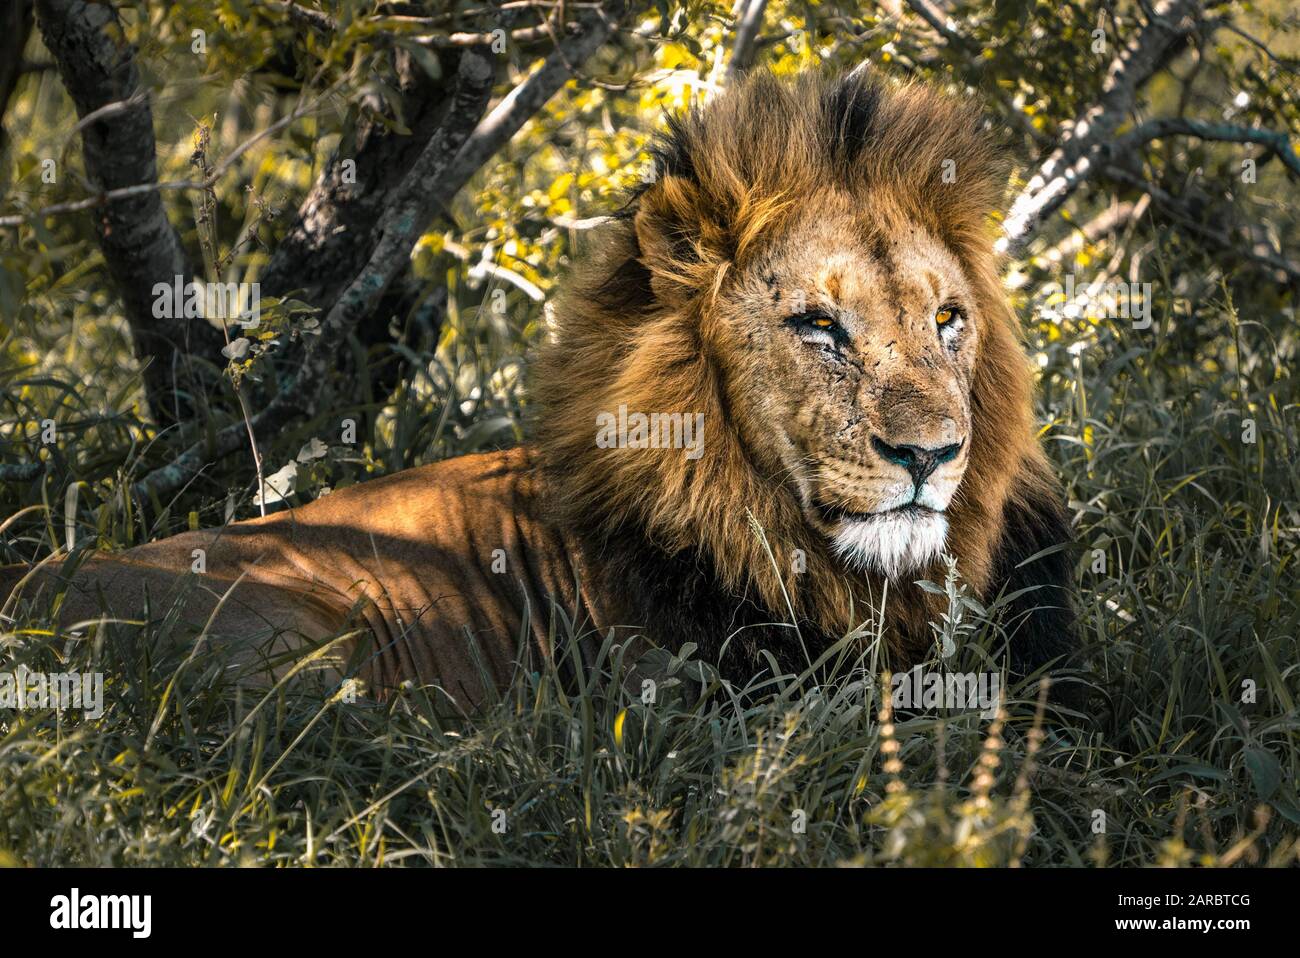 Male Lion with scars rests in wilderness, Kruger National Park South Africa Stock Photo